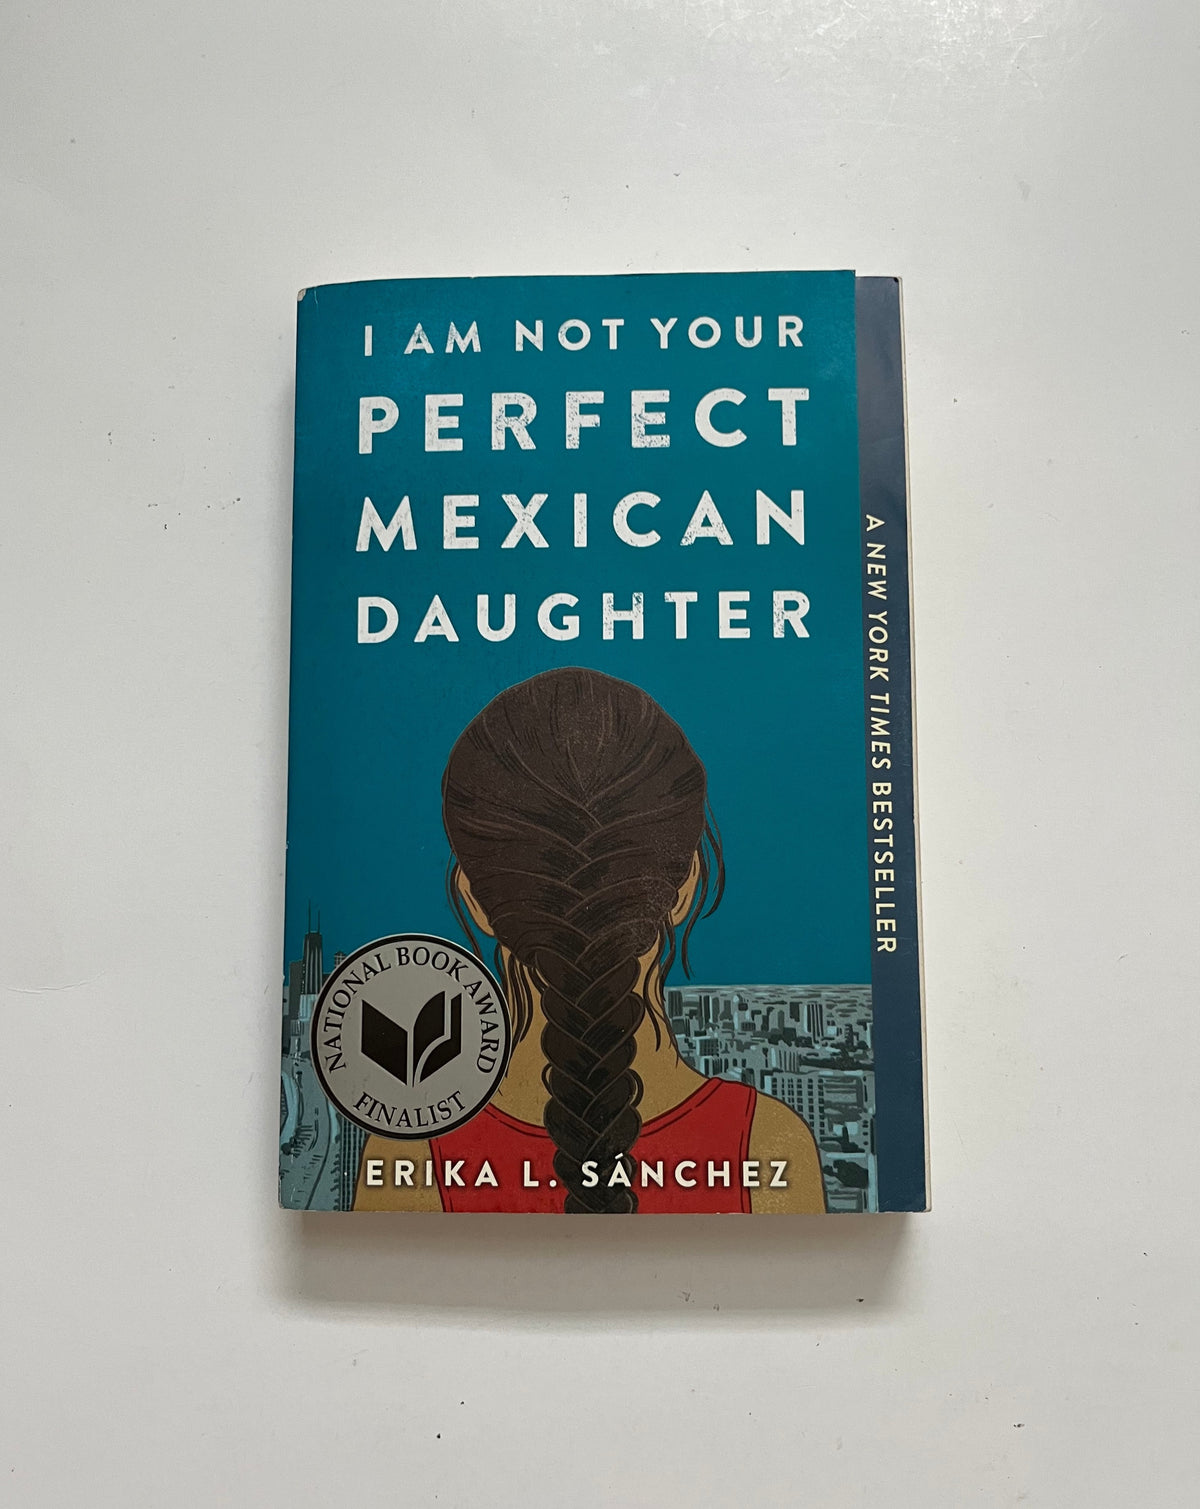 I Am Not Your Perfect Mexican Daughter by Erika Sanchez